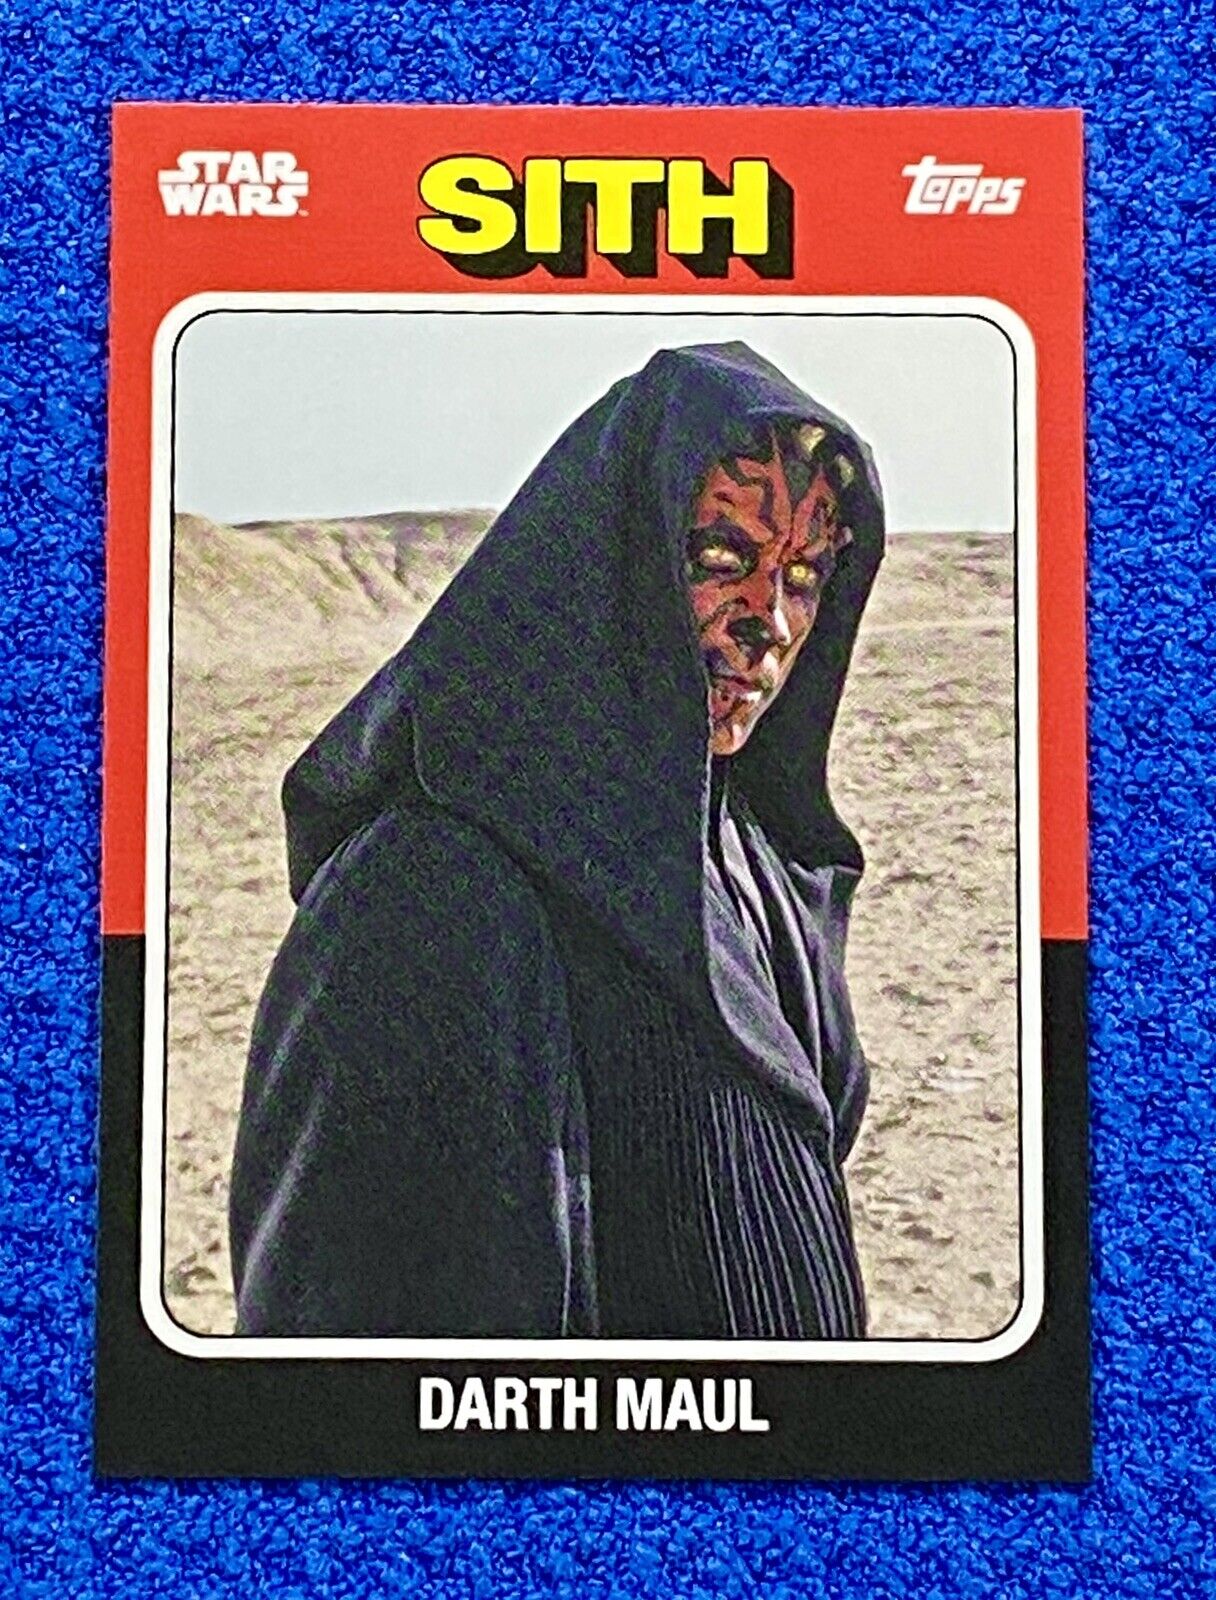 Deadly Sith Lord/Warrior “DARTH MAUL” 2024 Star Wars Topps TBT Card #41, Mint